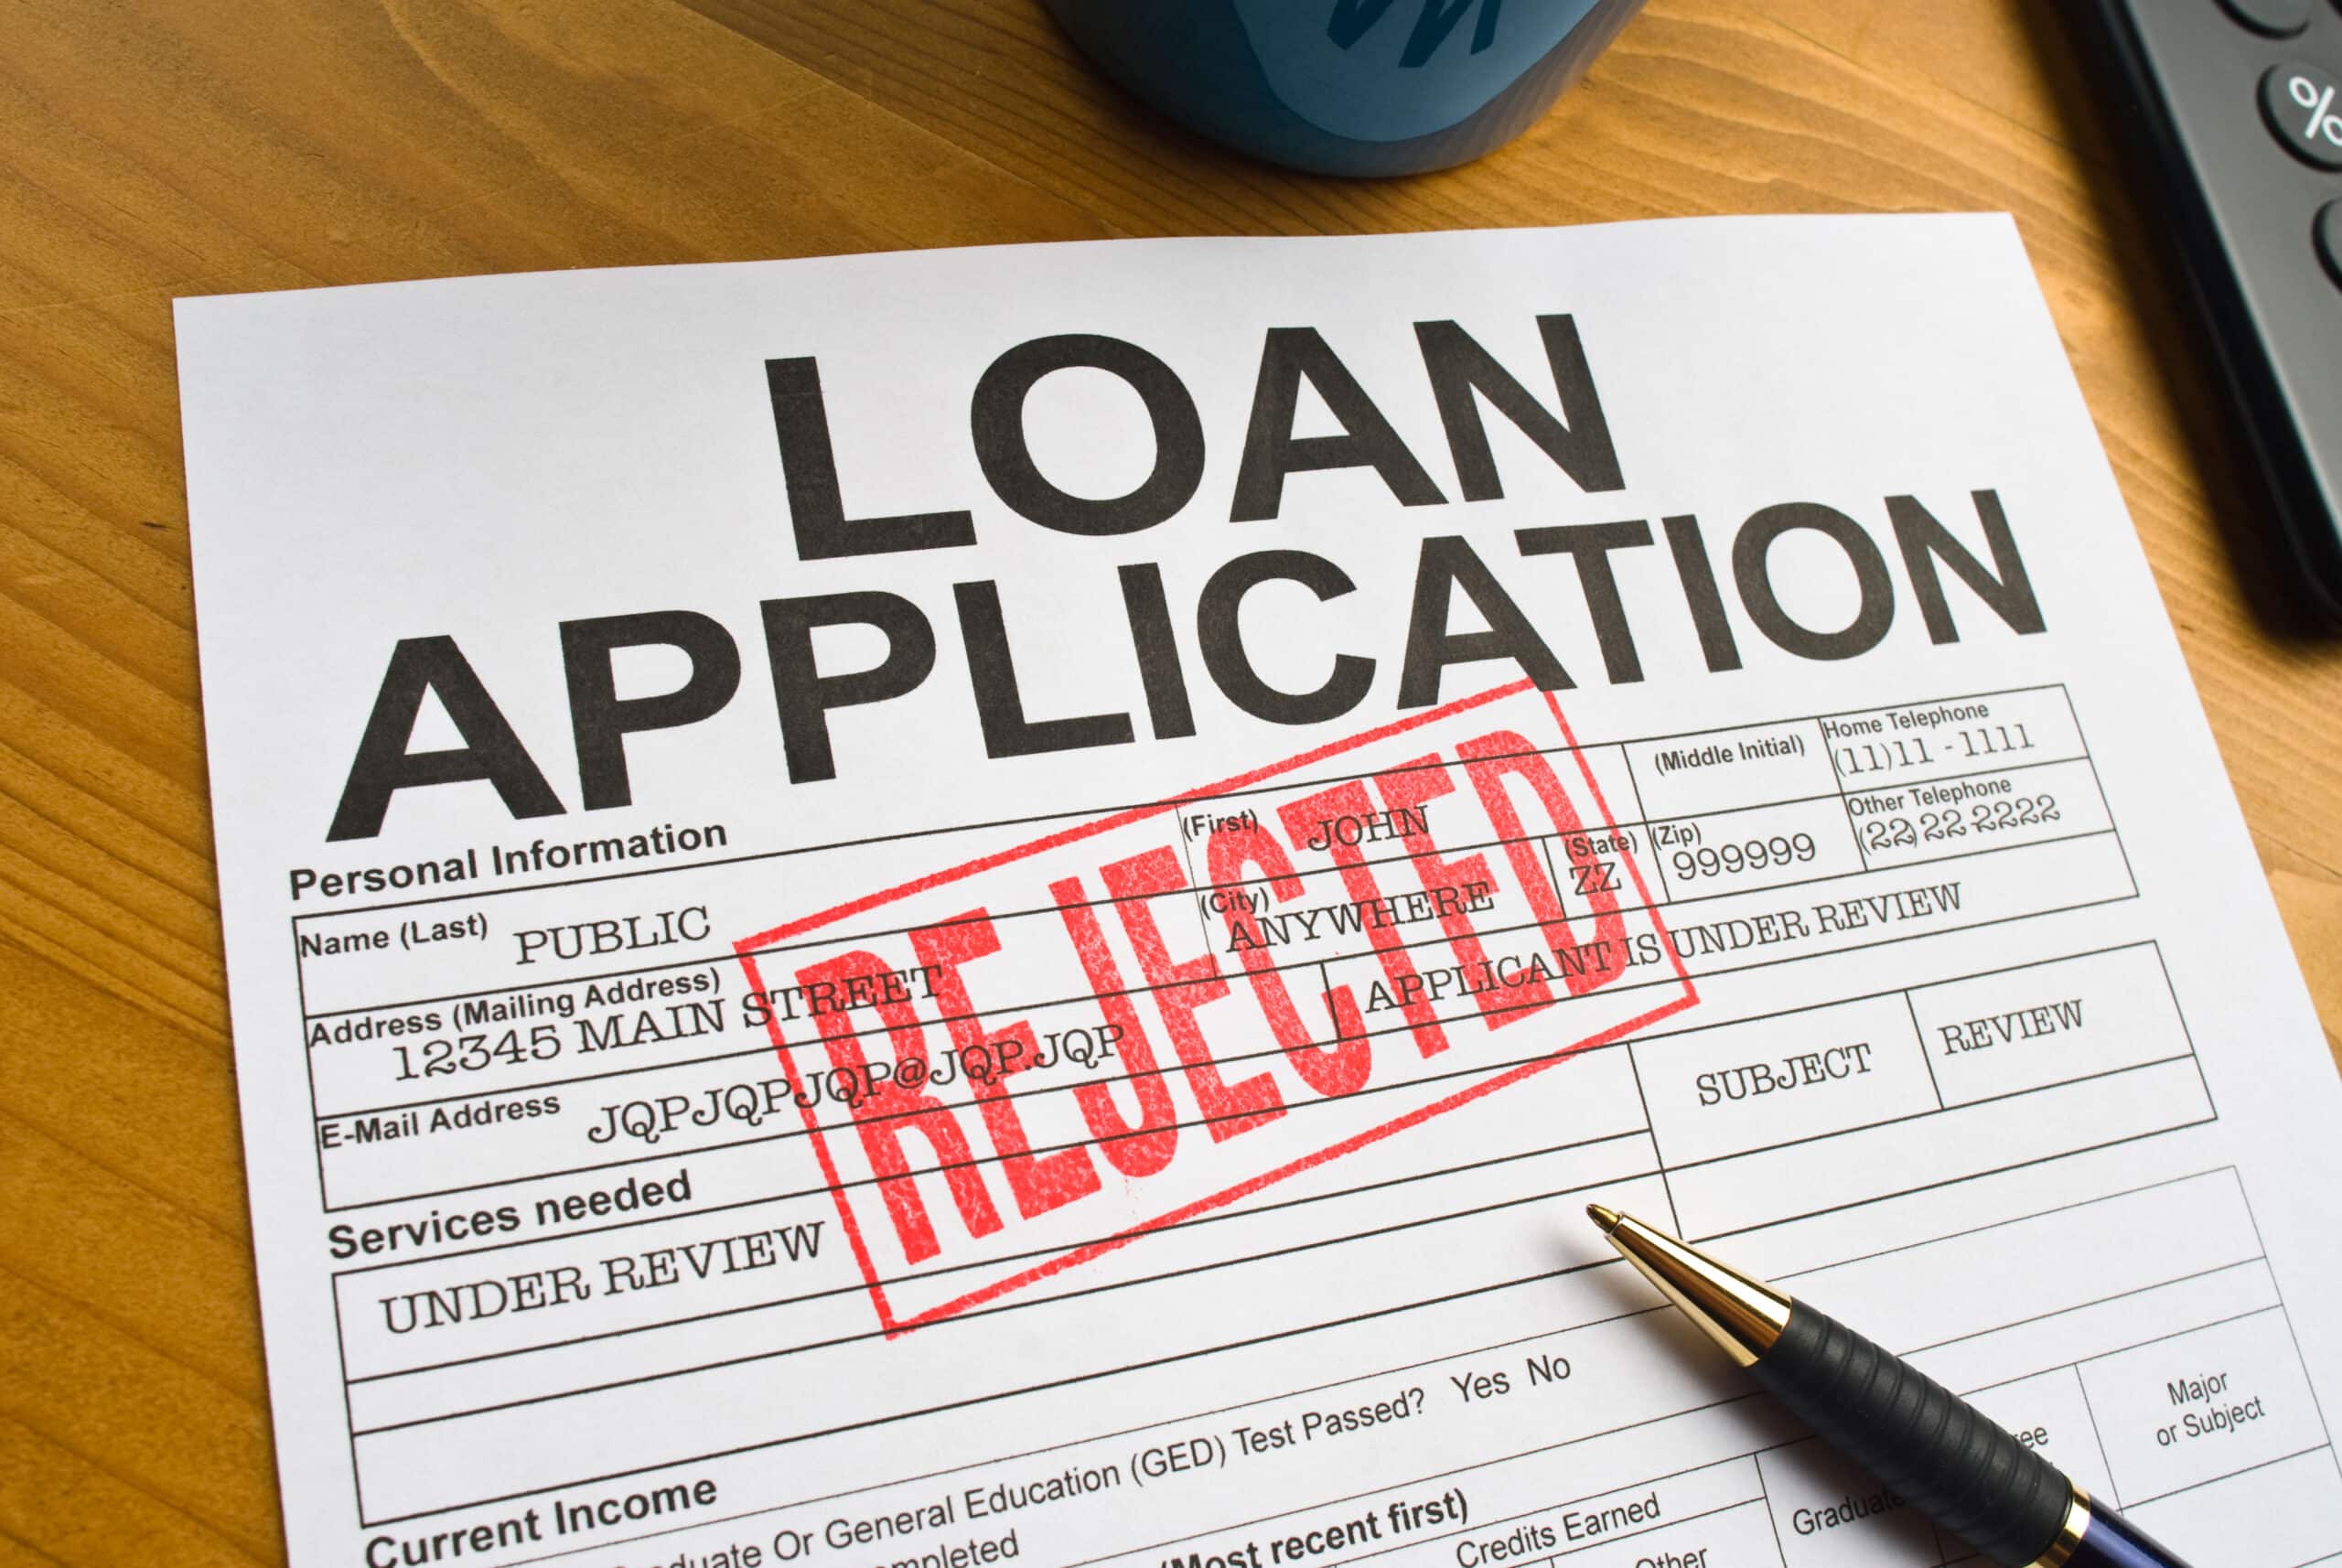 5 Silly Mistakes You Can Make For Your Personal Loan to Be Declined or Delayed